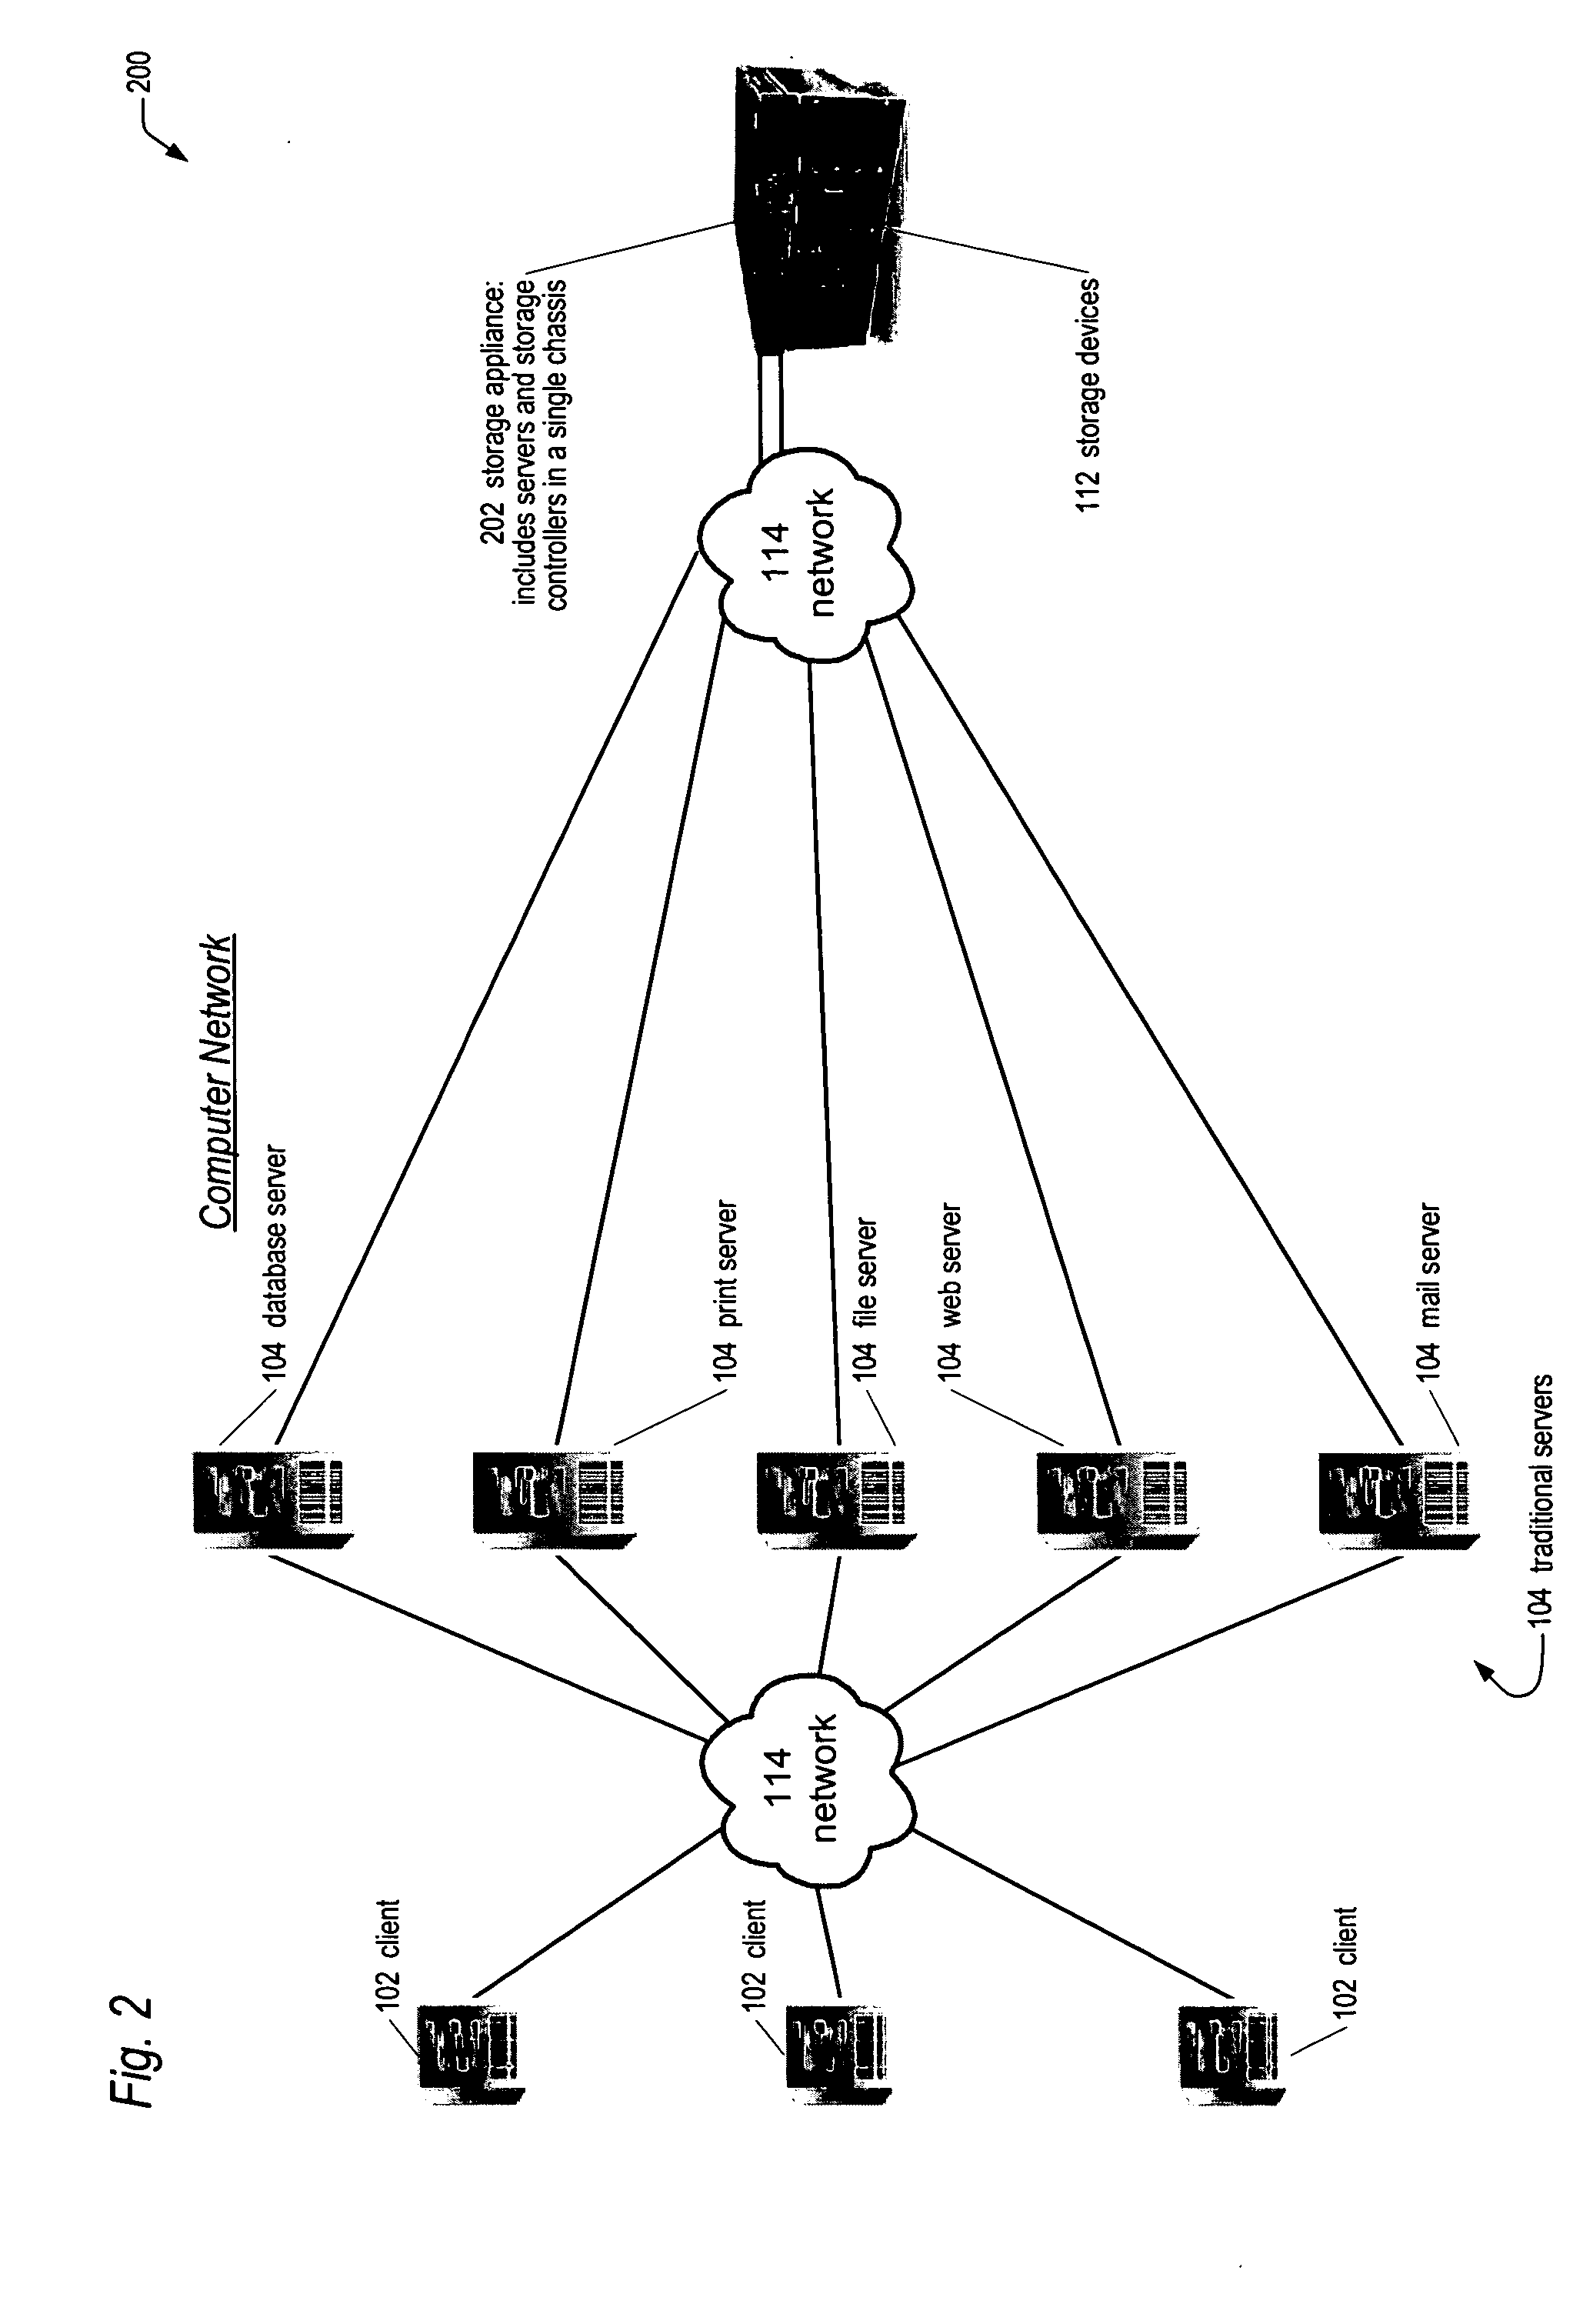 Apparatus and method for deterministically killing one of redundant servers integrated within a network storage appliance chassis